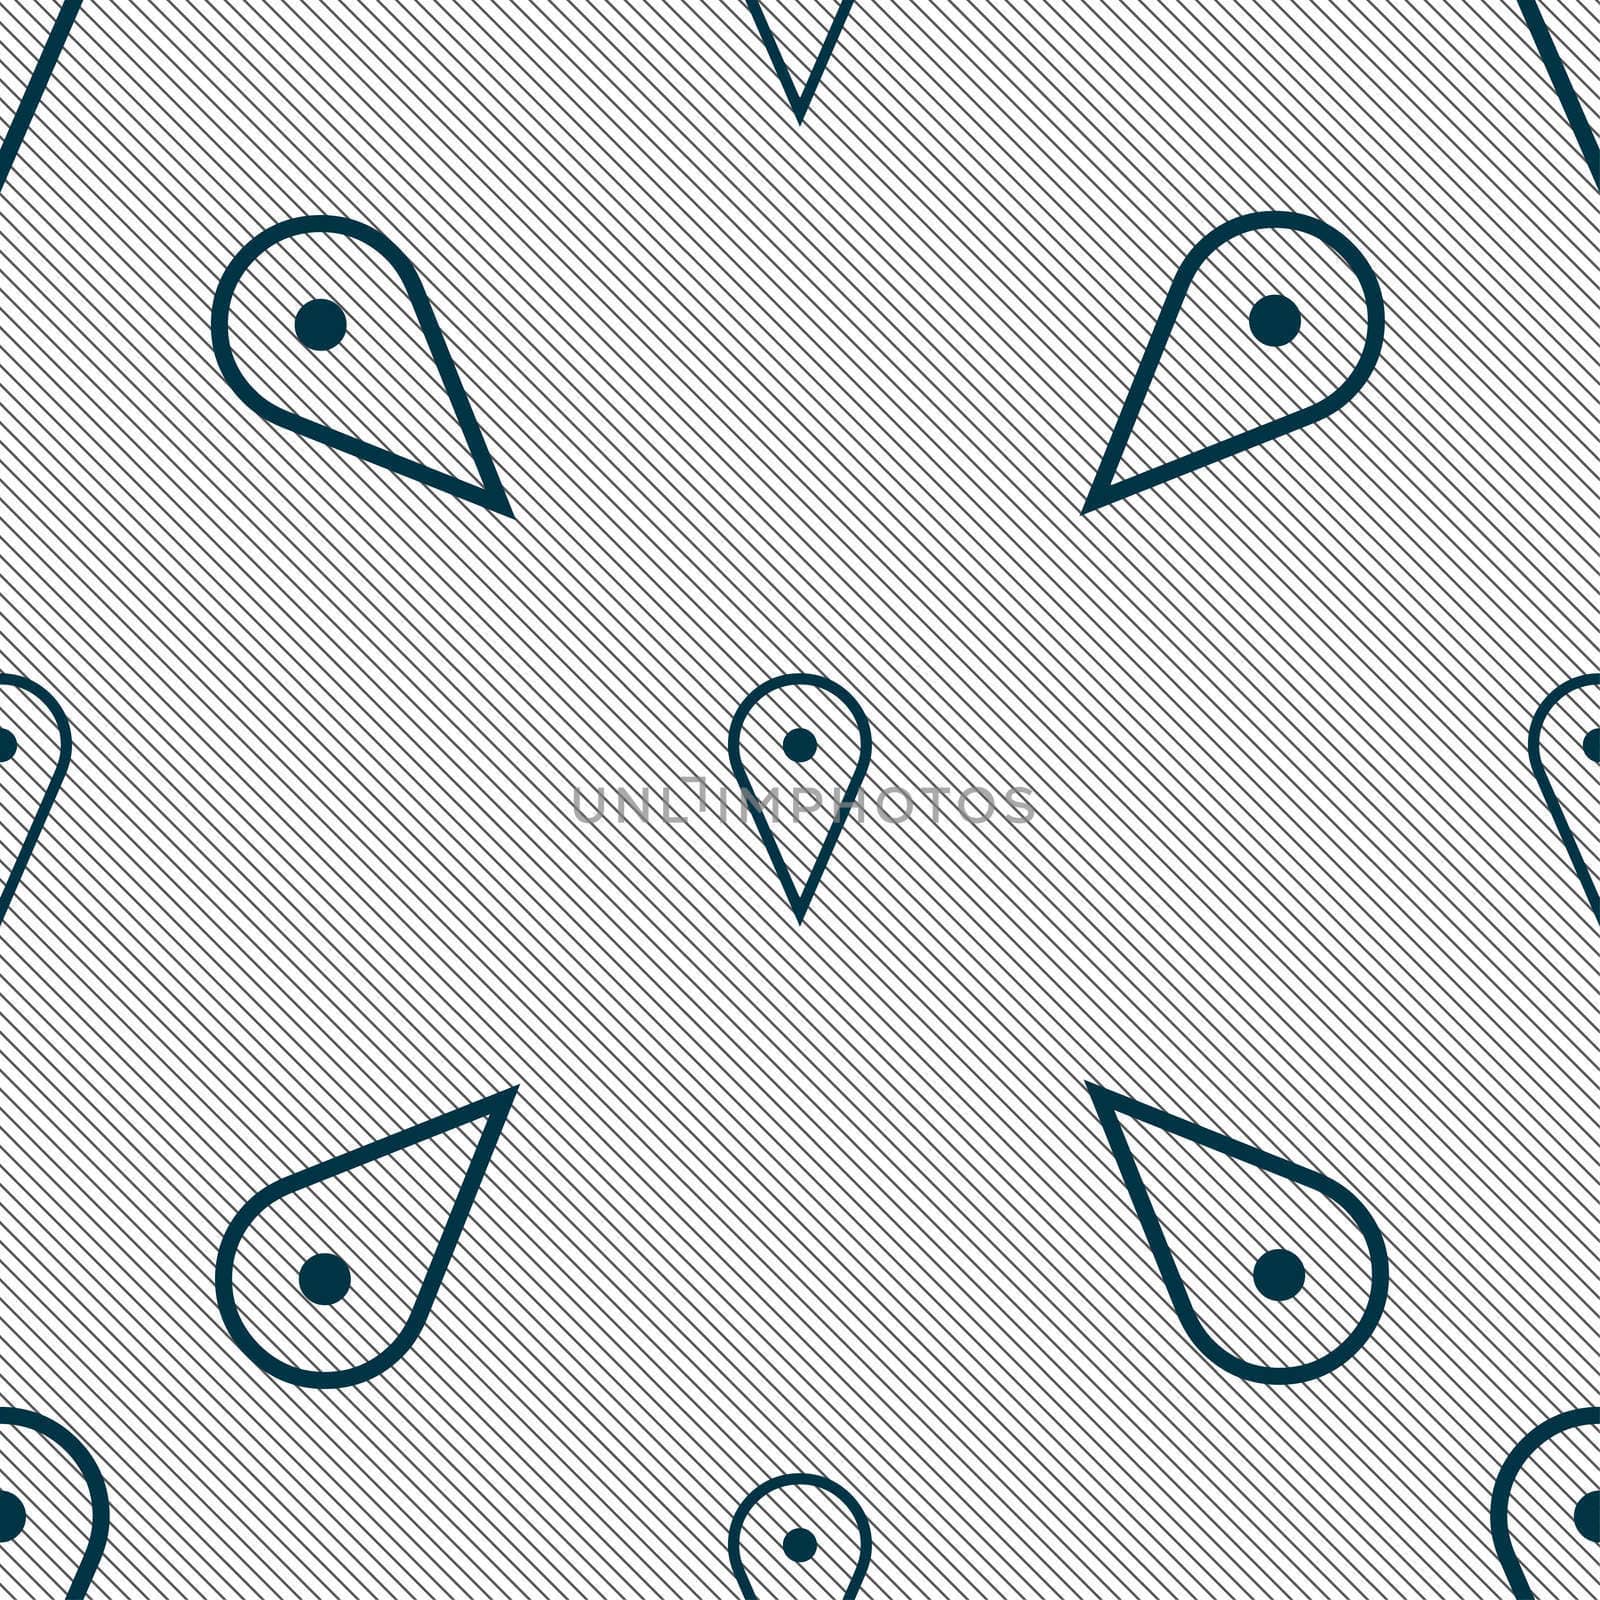 map poiner icon sign. Seamless pattern with geometric texture.  by serhii_lohvyniuk